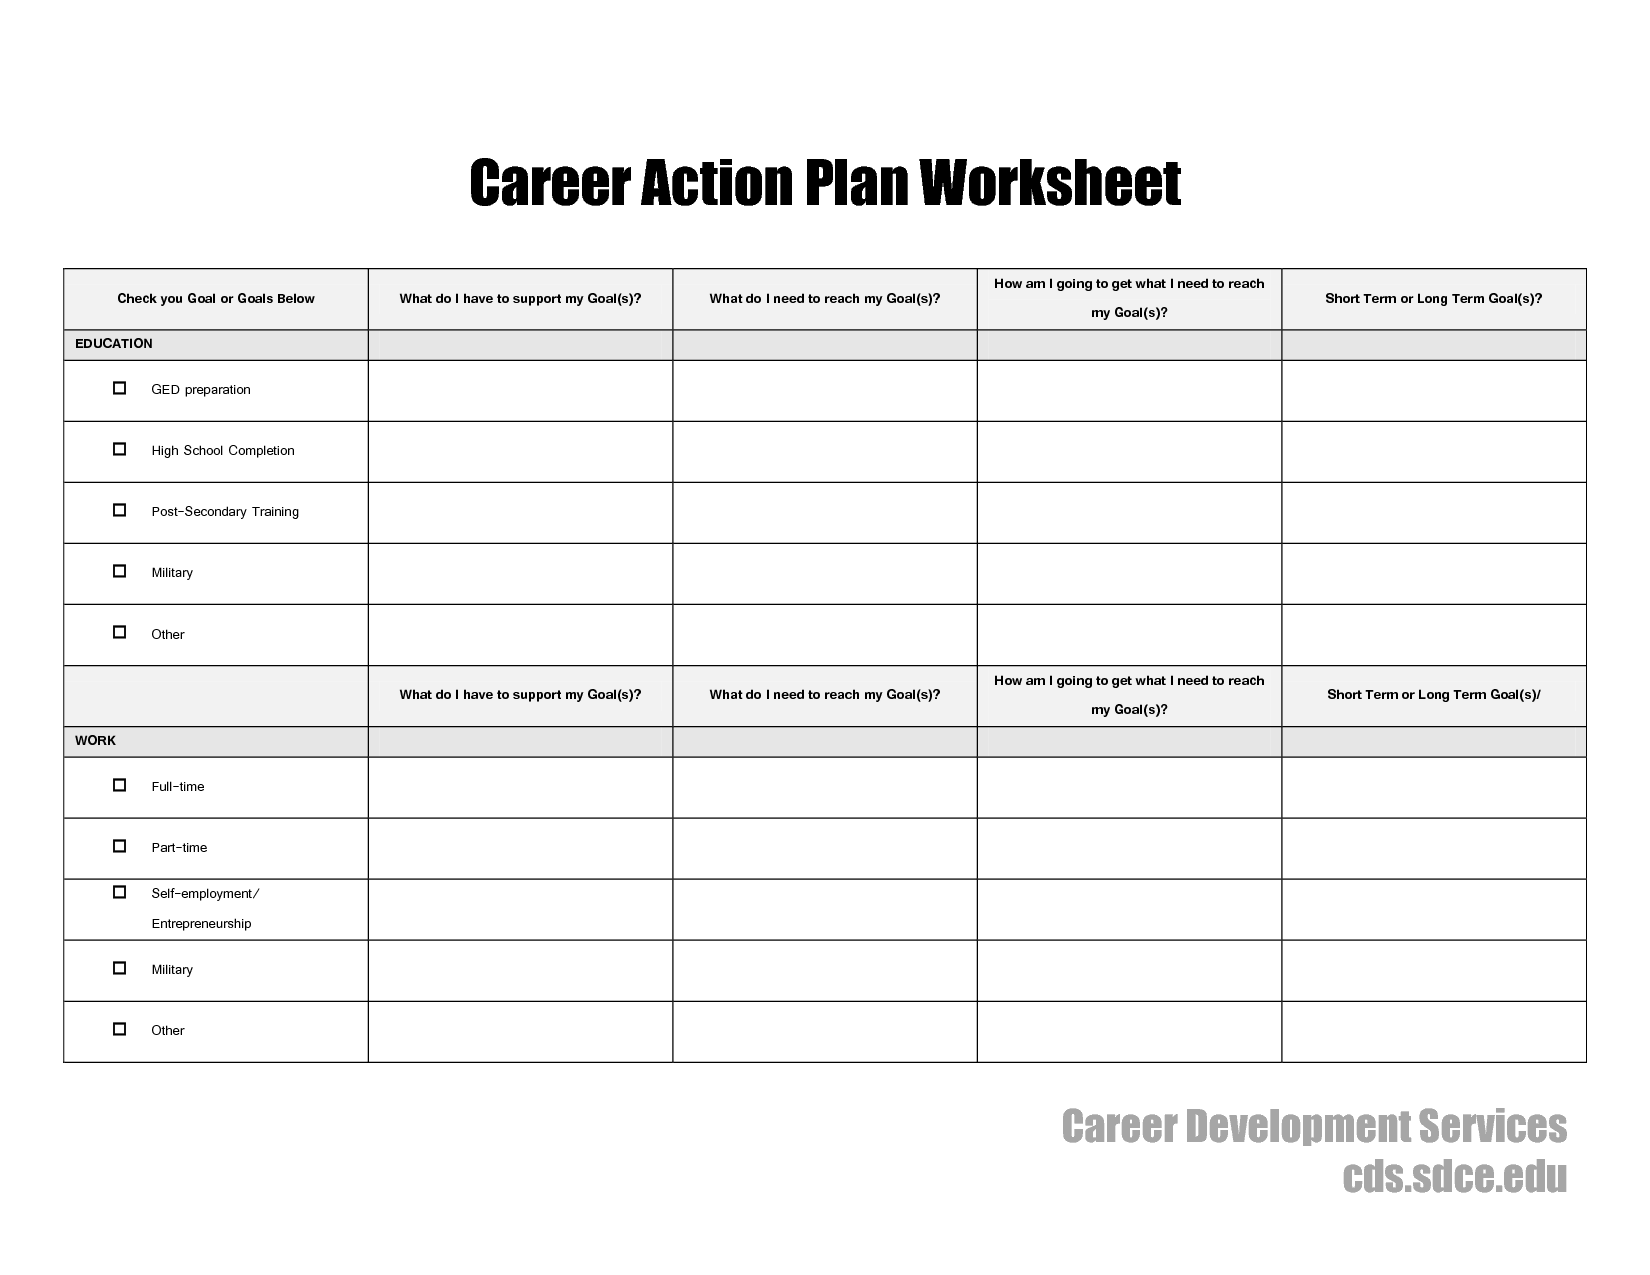 Job search activities for high school students